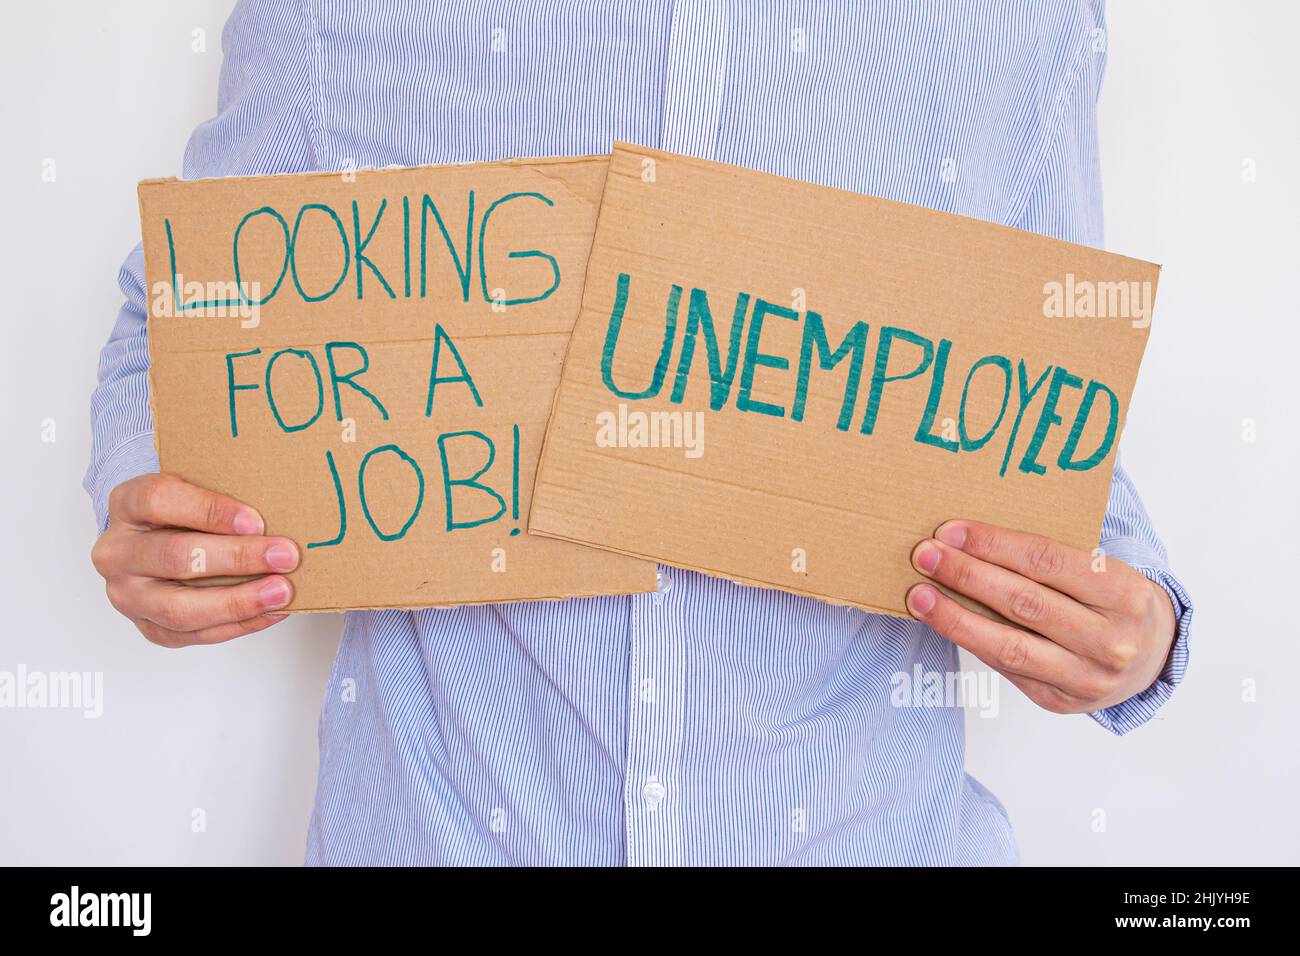 Unemployed man holding sign board with inscription LOOKING FOR A JOB. Concept of losing job and looking a new one. He is having financial problems. Stock Photo